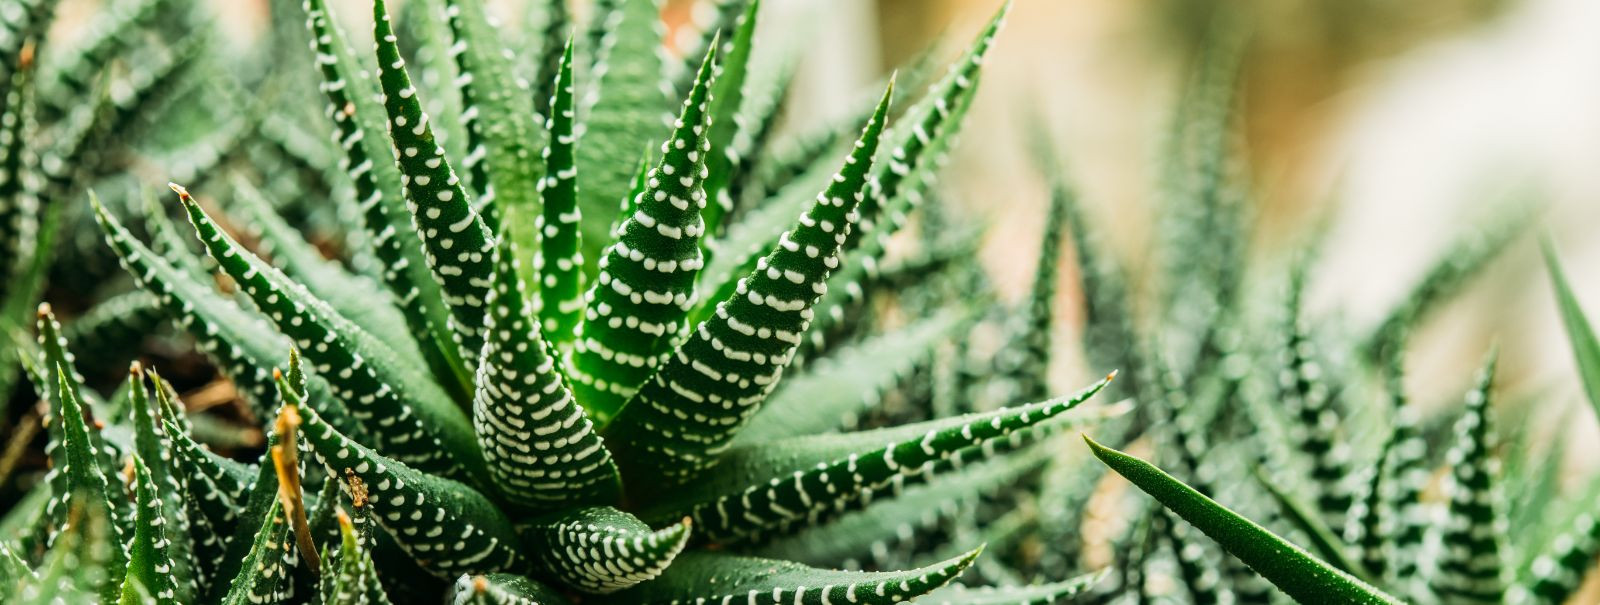 Active Aloe, also known as Aloe Barbadensis, is a potent extract from the Aloe Vera plant, renowned for its healing and soothing properties. Unlike regular aloe